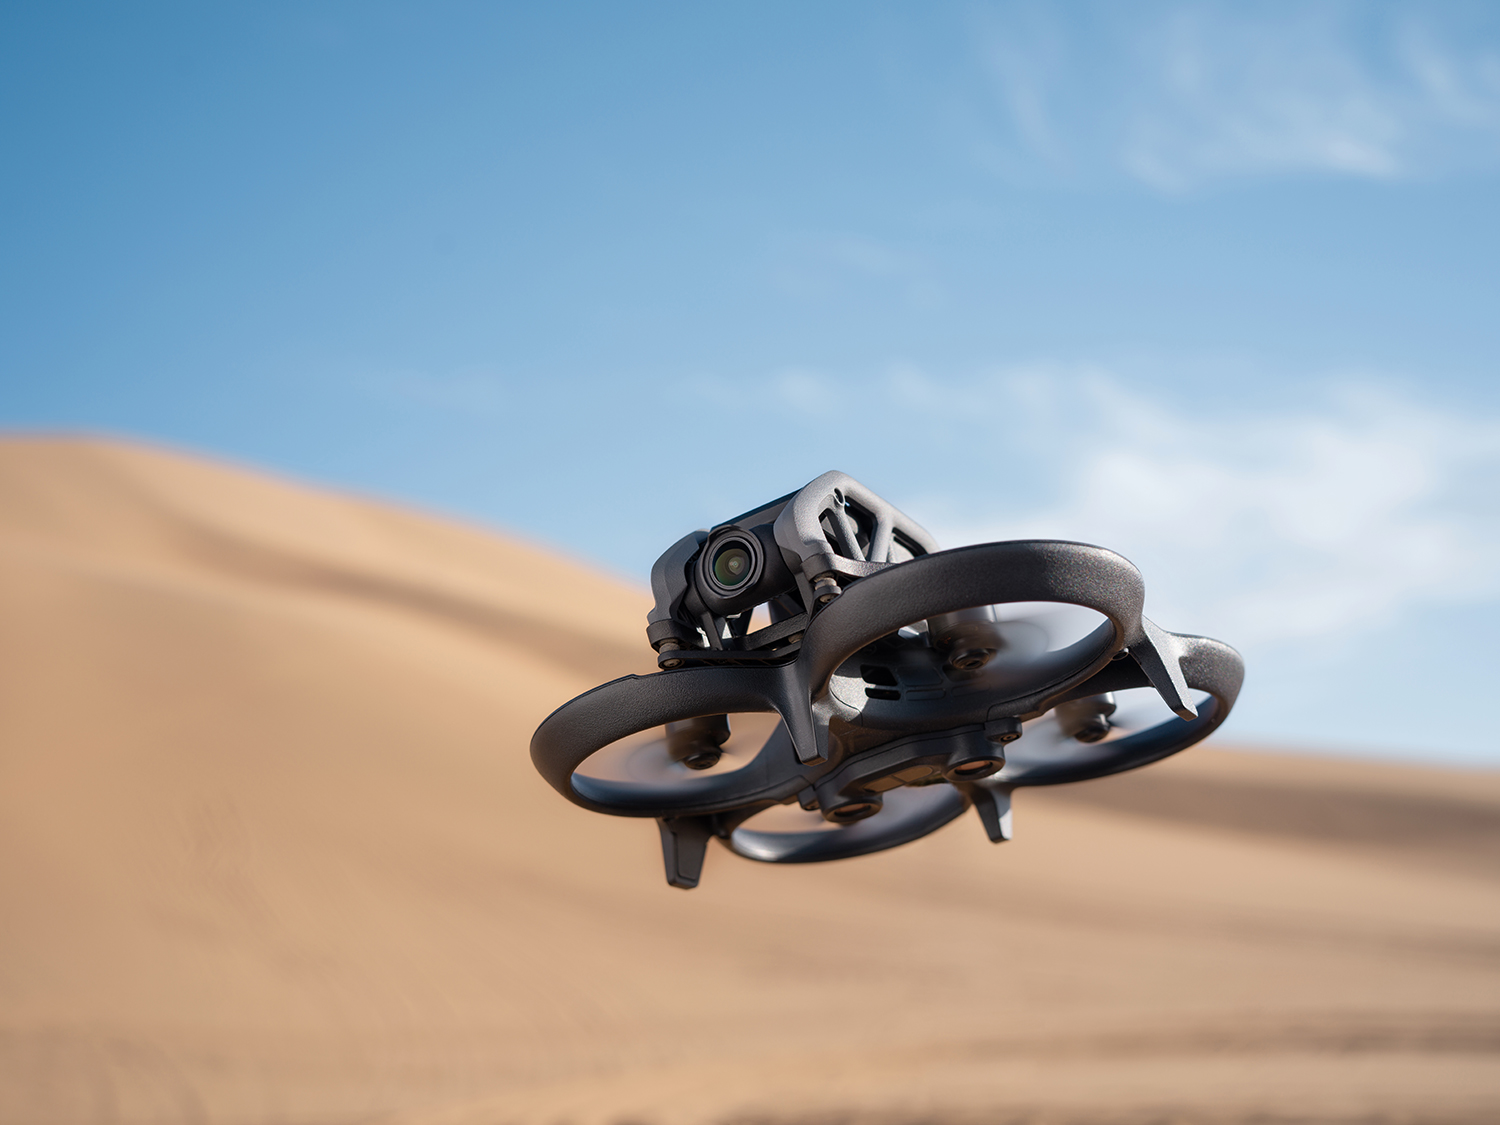 Image of Avata FPV Drone from DJI in air with sable background